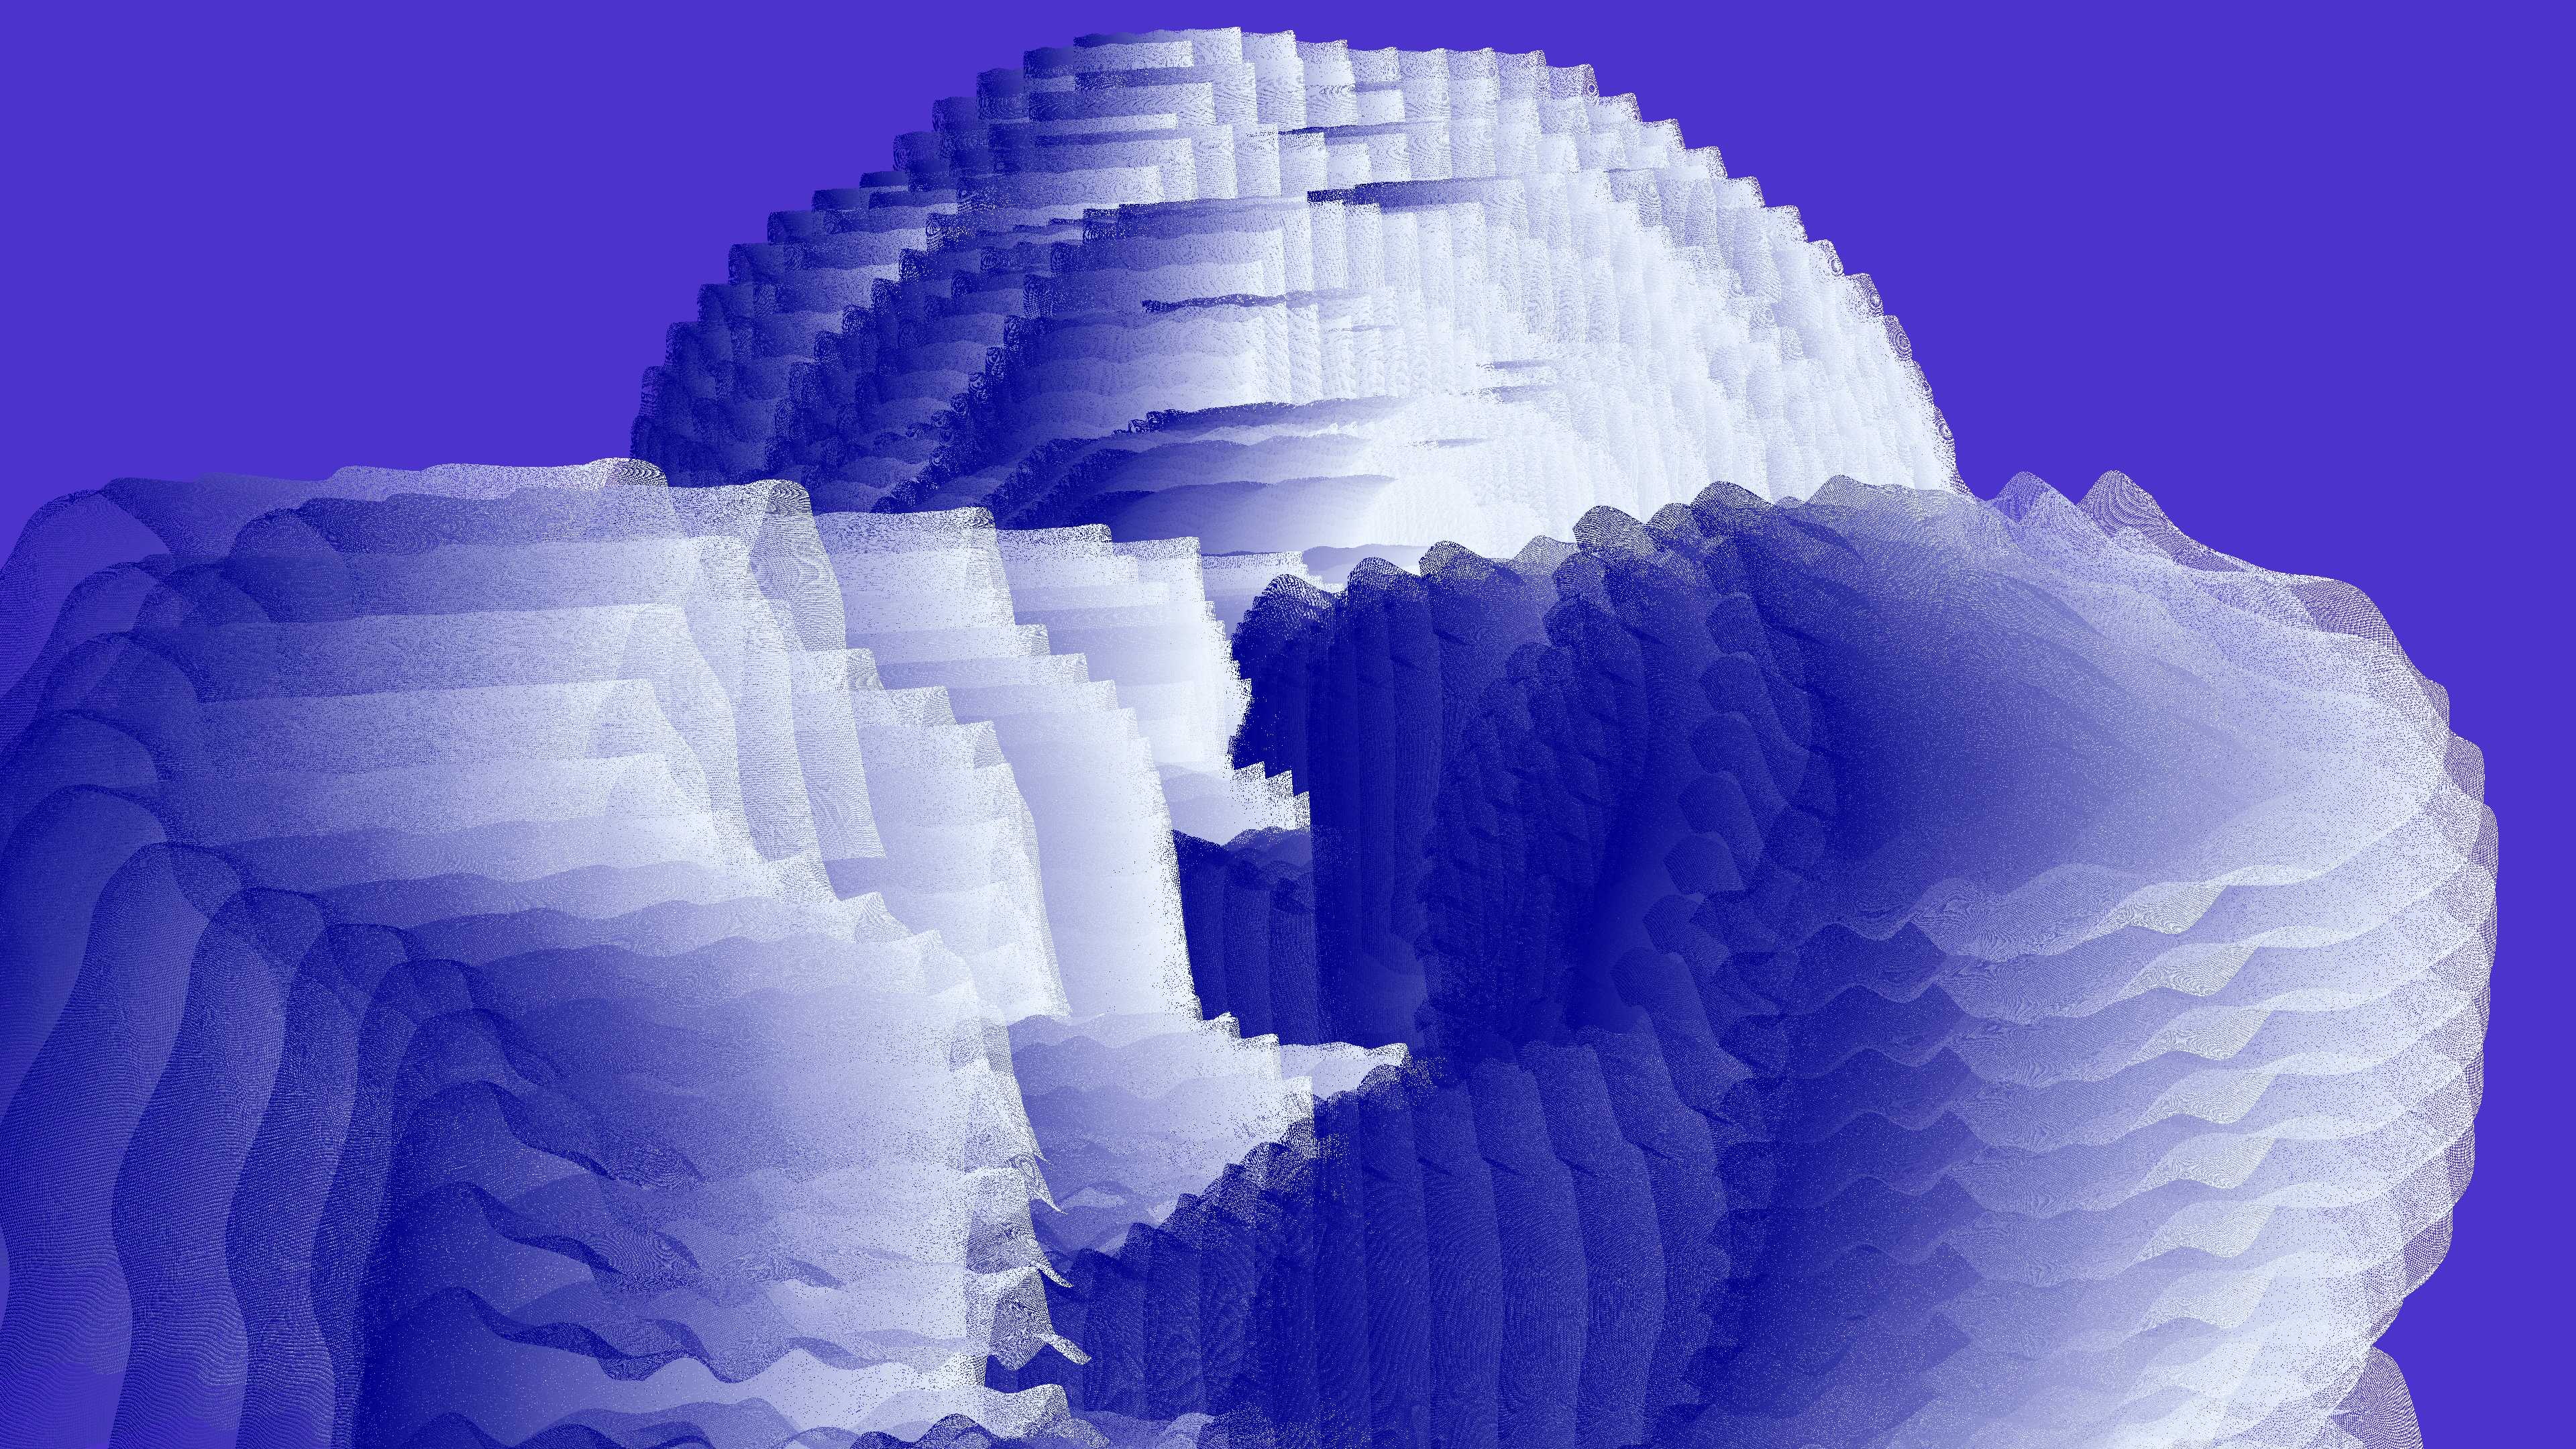 First frame from final scene - Perlin noise is used to alter the radius at which a Harmonograph is positioned, creating a noisier, more turbulent effect